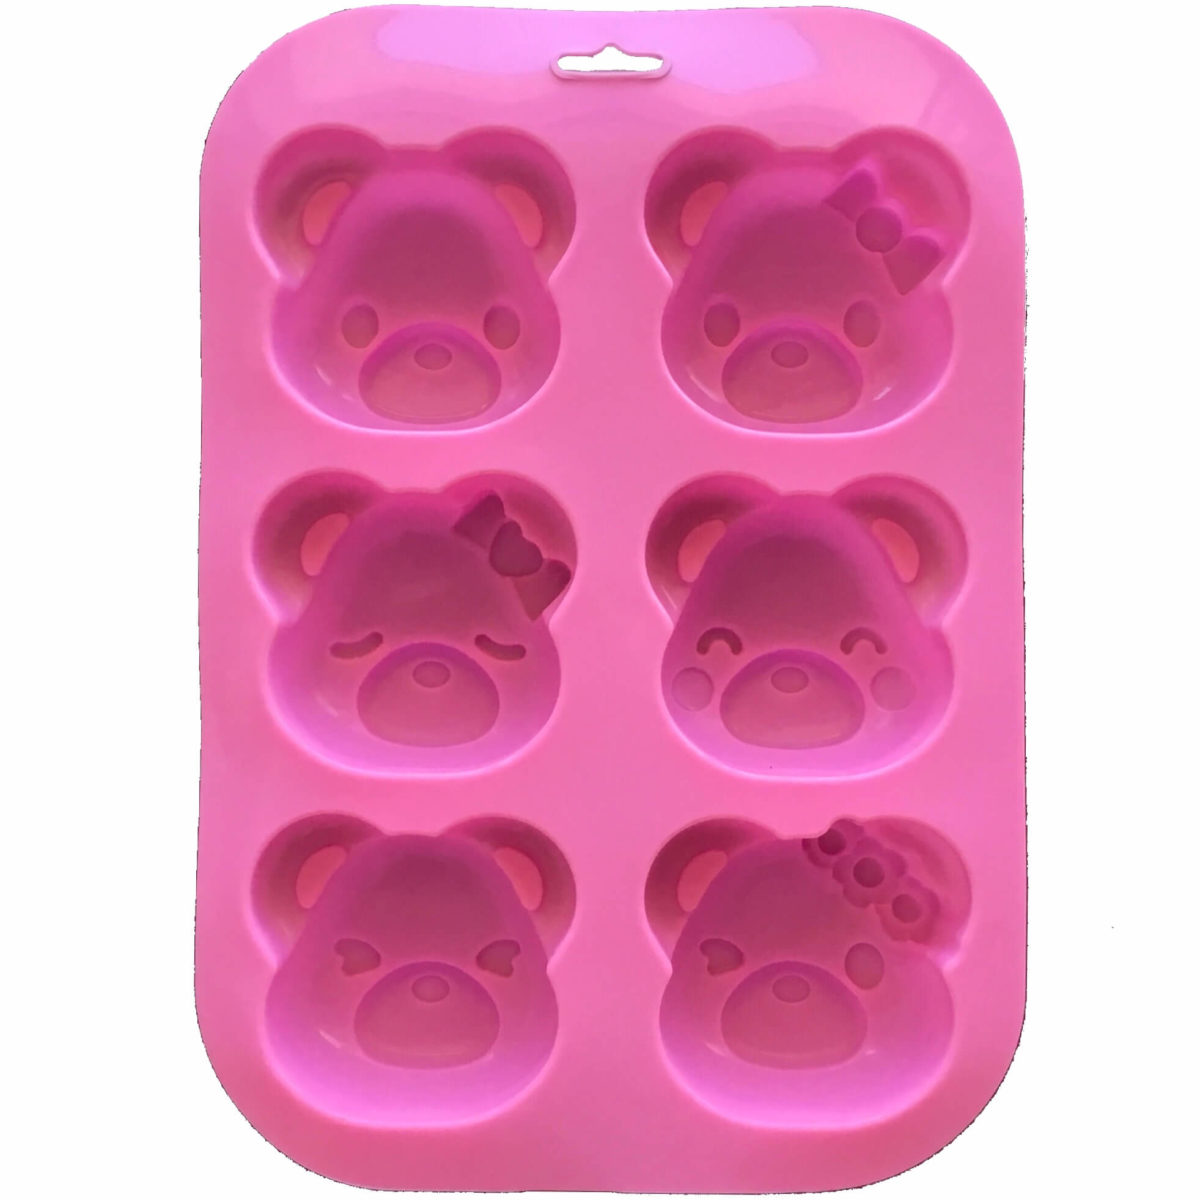 back of pink six cavity silicone mould with teddy bear head-shaped cavities each with an individual facial expression showing mould cavity details